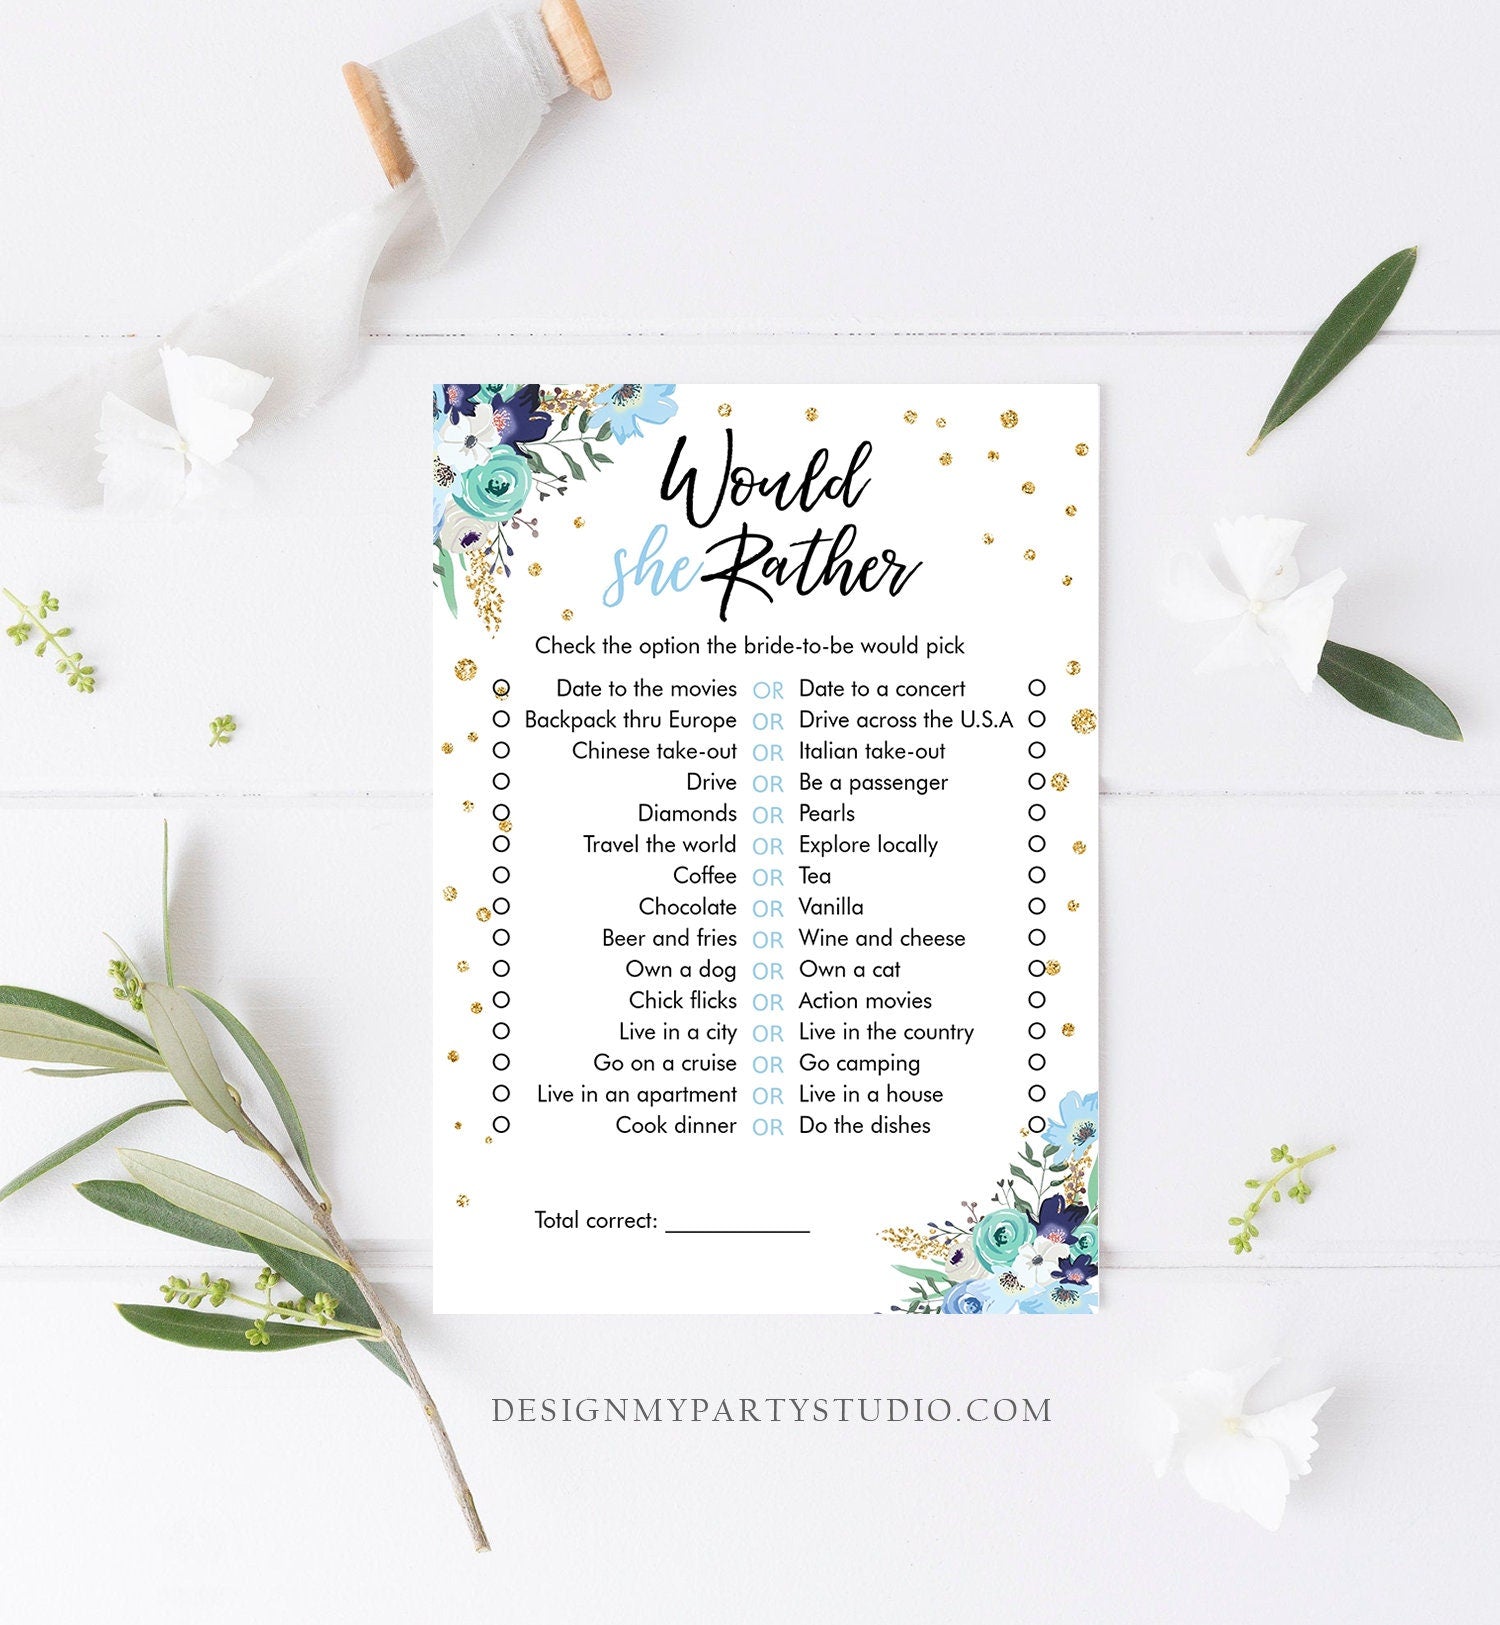 Editable Would She Rather Bridal Shower Game Wedding Shower Activity Floral Blue Gold Confetti Party Corjl Template Printable 0030